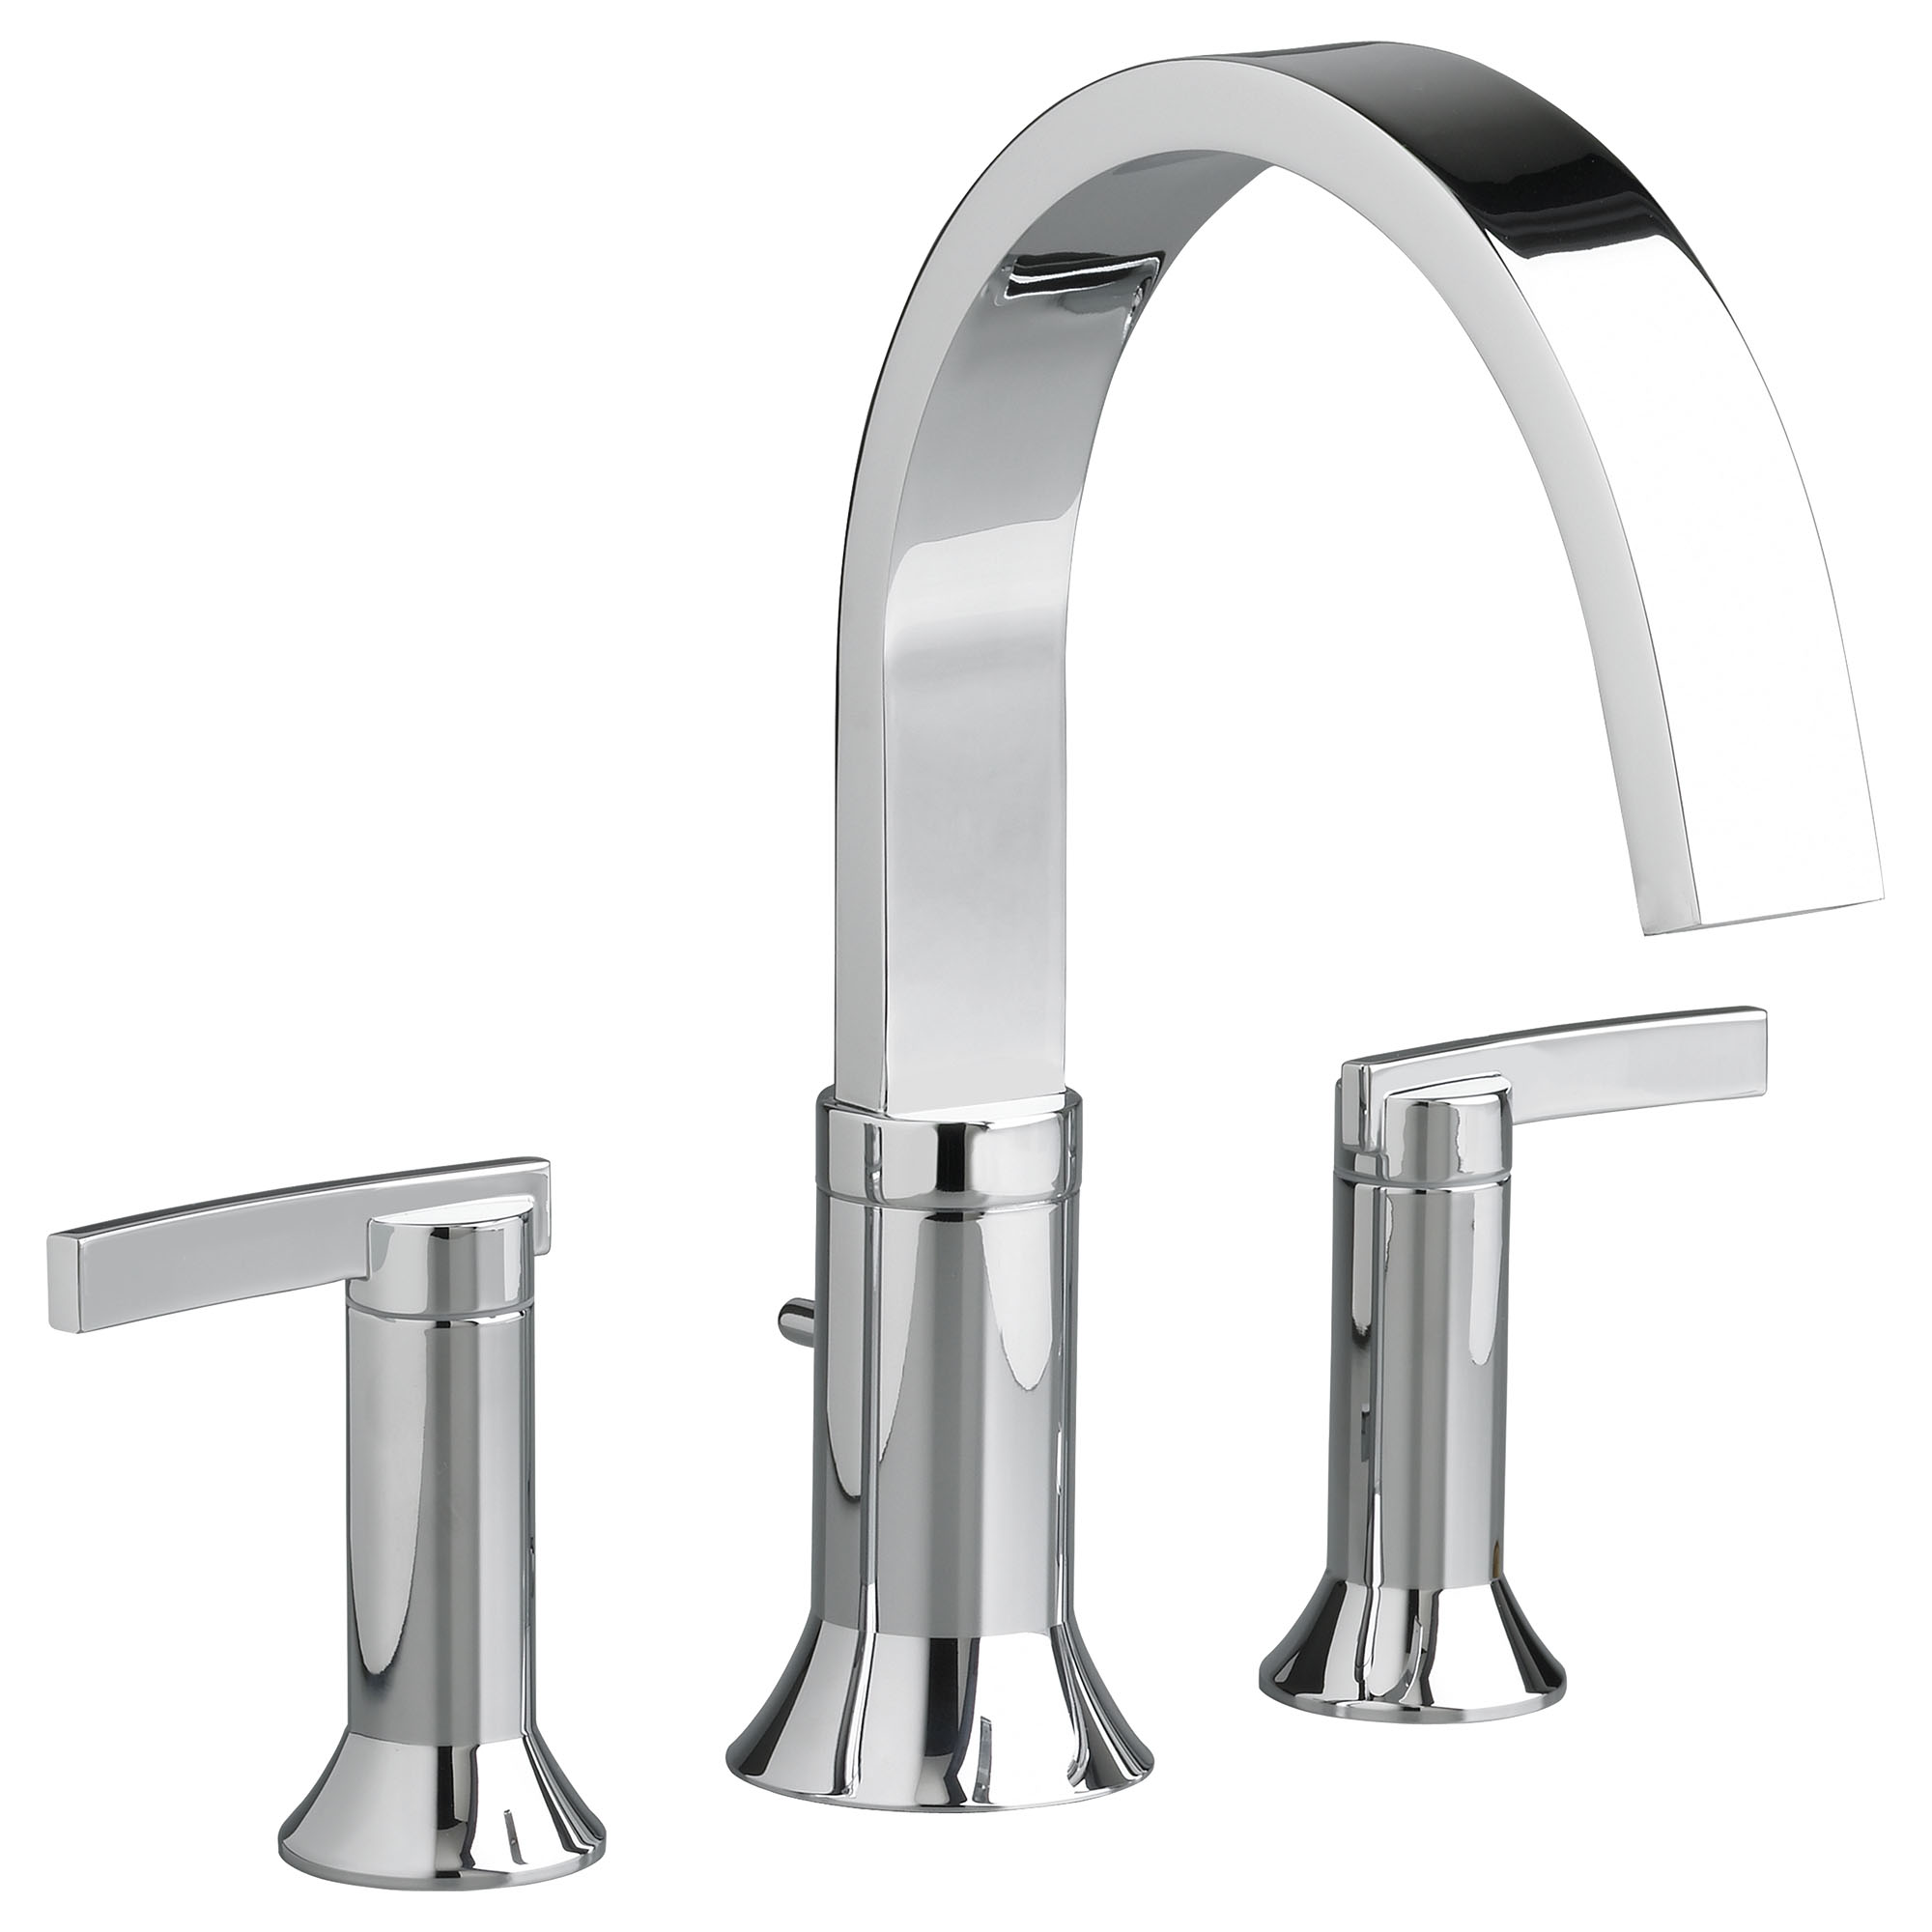 Berwick Deck-Mount Bathtub Faucet for Flash Rough-in Valve with Lever Handles